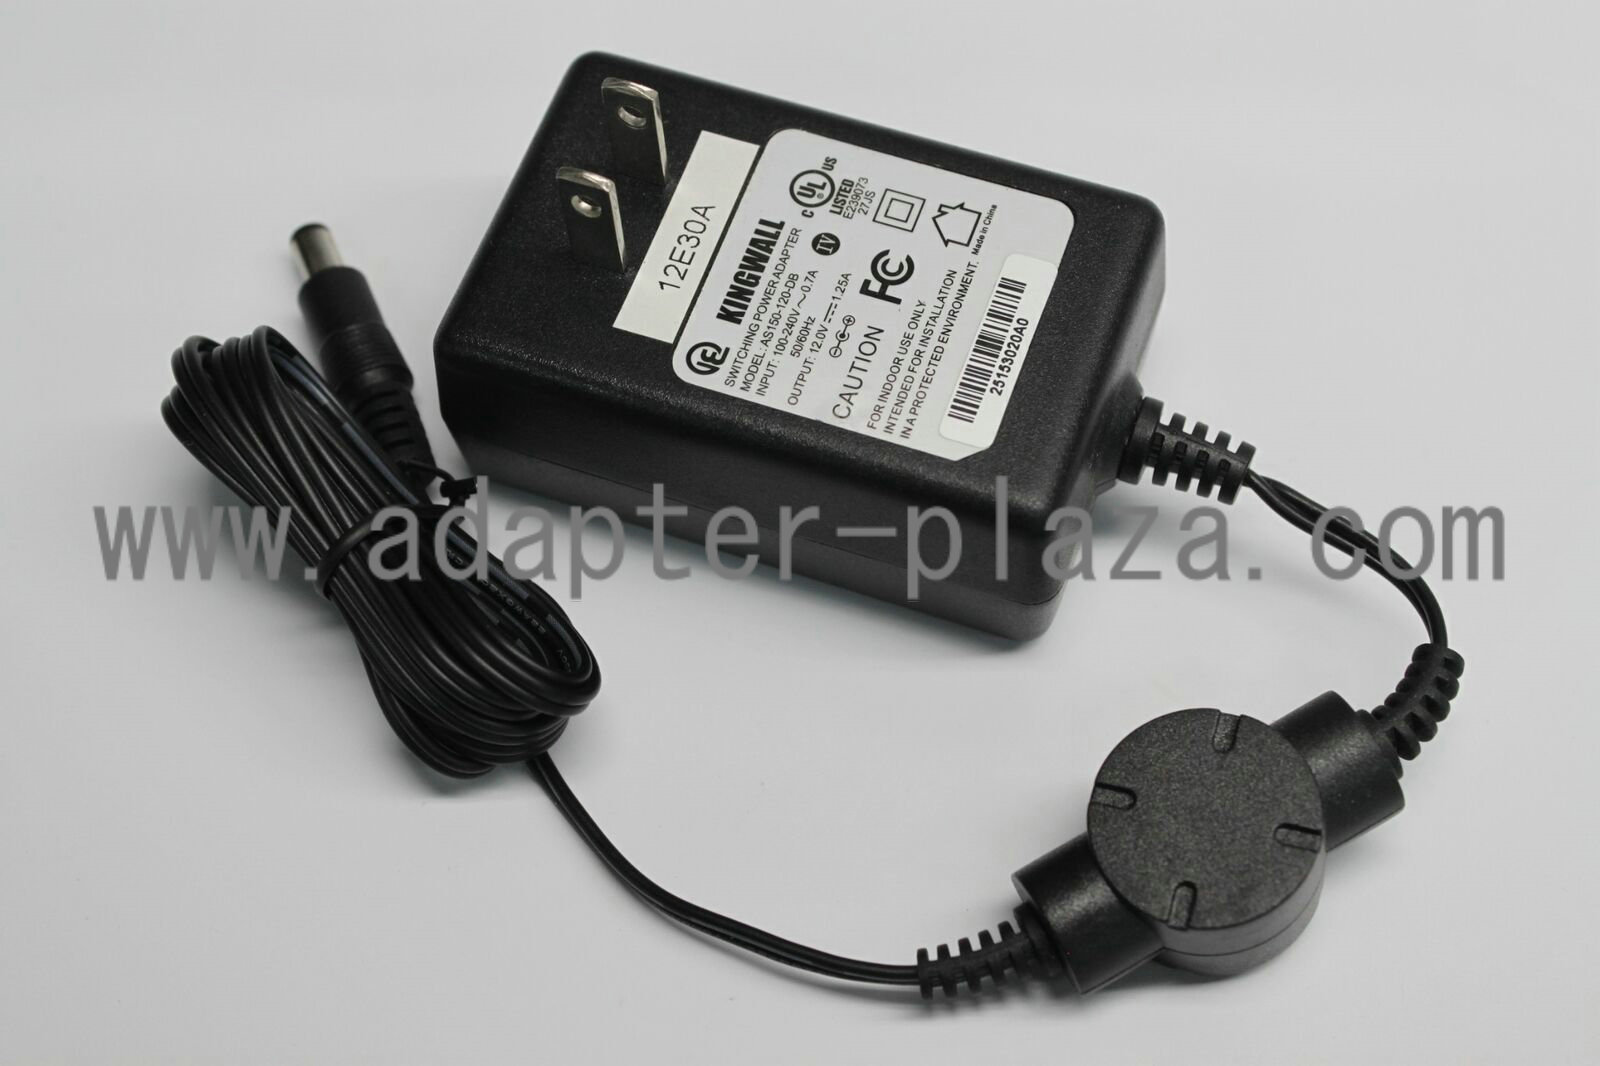 Kingwall AS150-120-DB Switching Power Supply DC 12V 1.25A AC Adapter